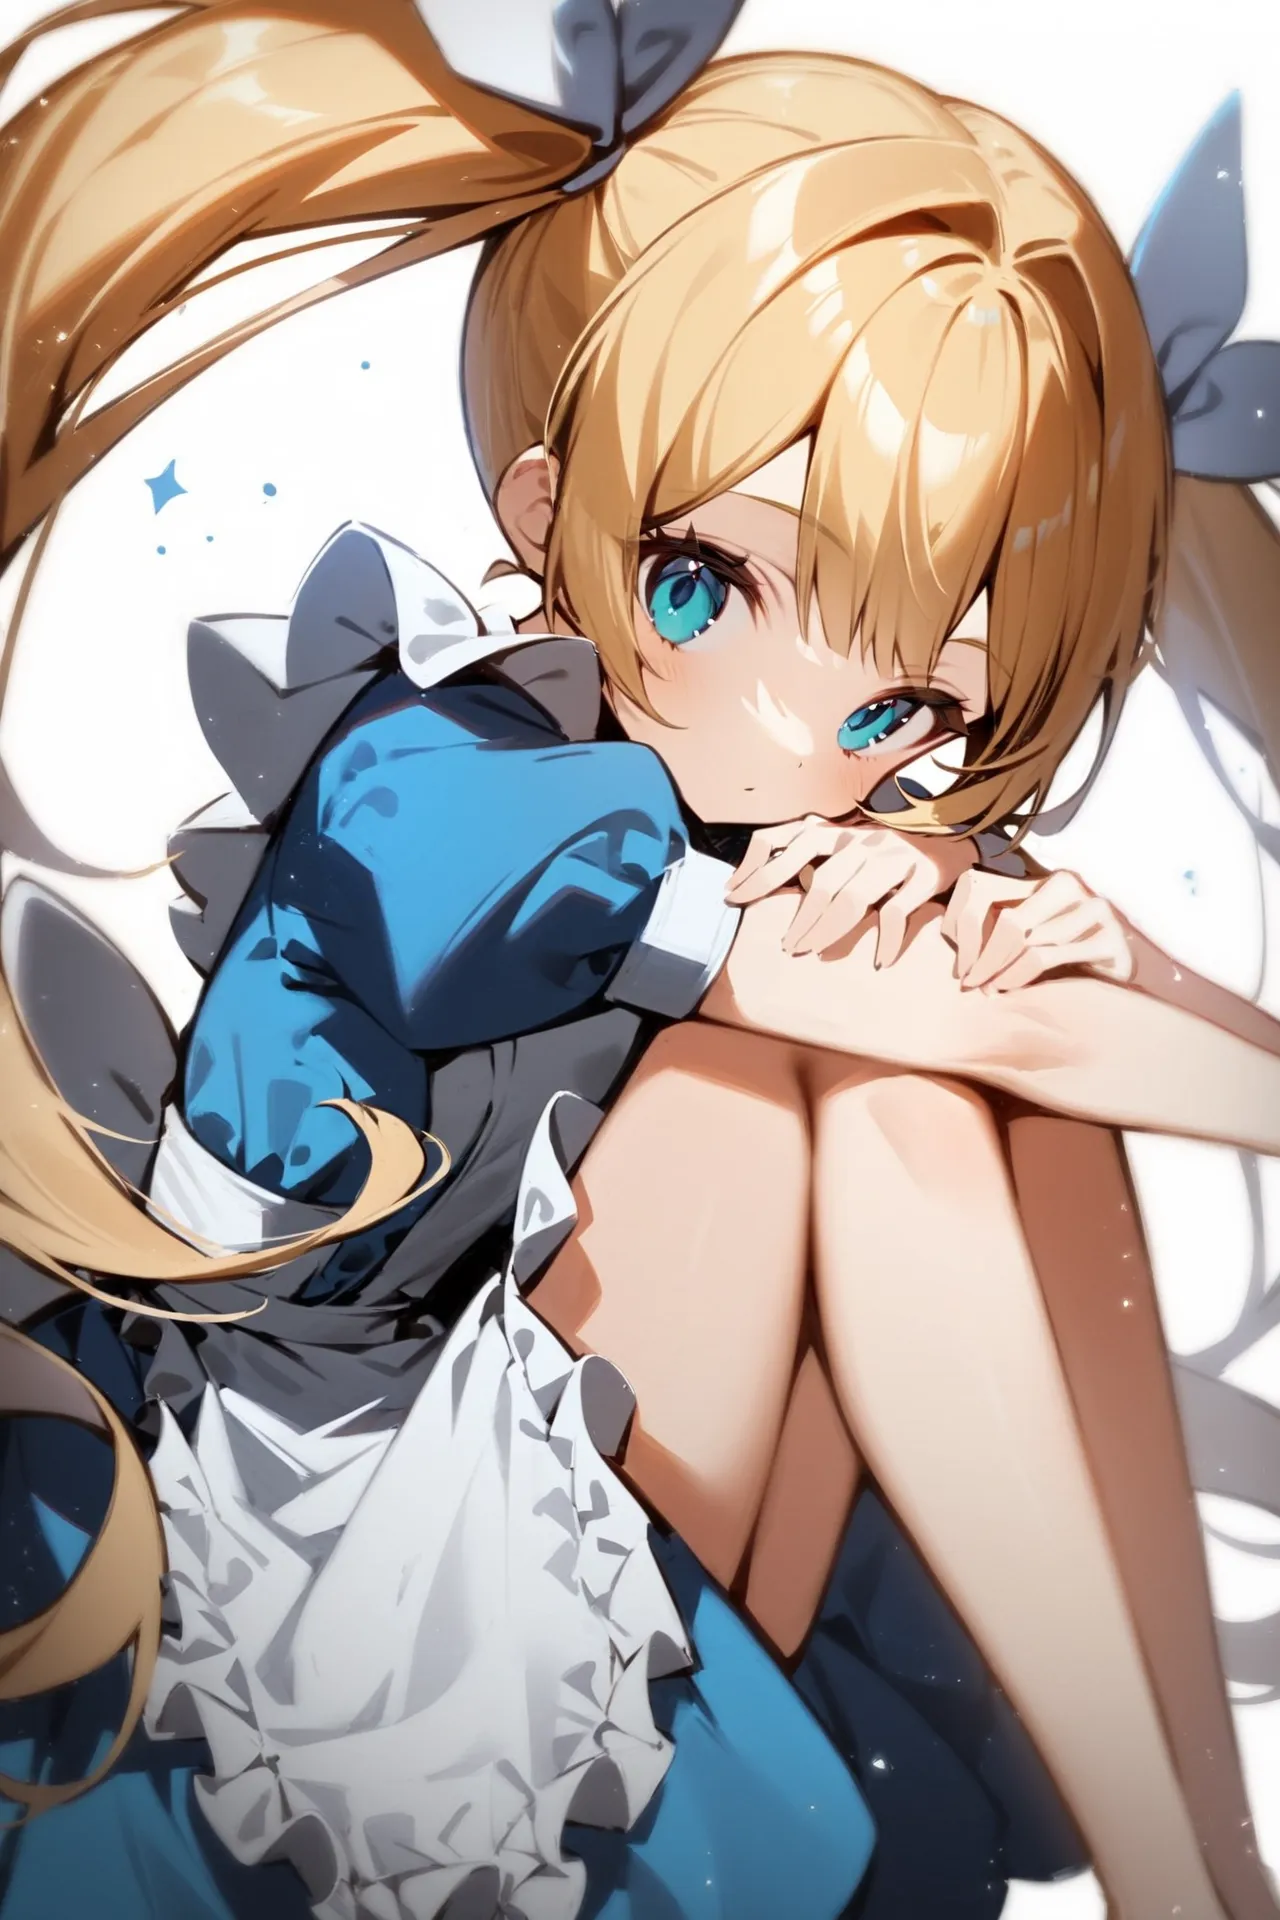 '1girl, knees to chest,\nblonde hair, twintails, blue dress, white apron,\nwhite background,\nAlice in glitterworld\nNegative prompt: (worst quality, low quality:1.4), nsfw\nSteps: 35, Sampler: DPM++ 2M SDE Karras, CFG scale: 7, Seed: 1, Size: 640x960, Model hash: 642b08ca49, Model: ConfusionXL2.0_fp16_vae, VAE hash: 63aeecb90f, VAE: sdxl_vae_0.9.safetensors, Denoising strength: 0.6, Clip skip: 2, Hires upscale: 2, Hires steps: 15, Hires upscaler: ESRGAN_4x, Eta: 0.68, Version: v1.7.0'